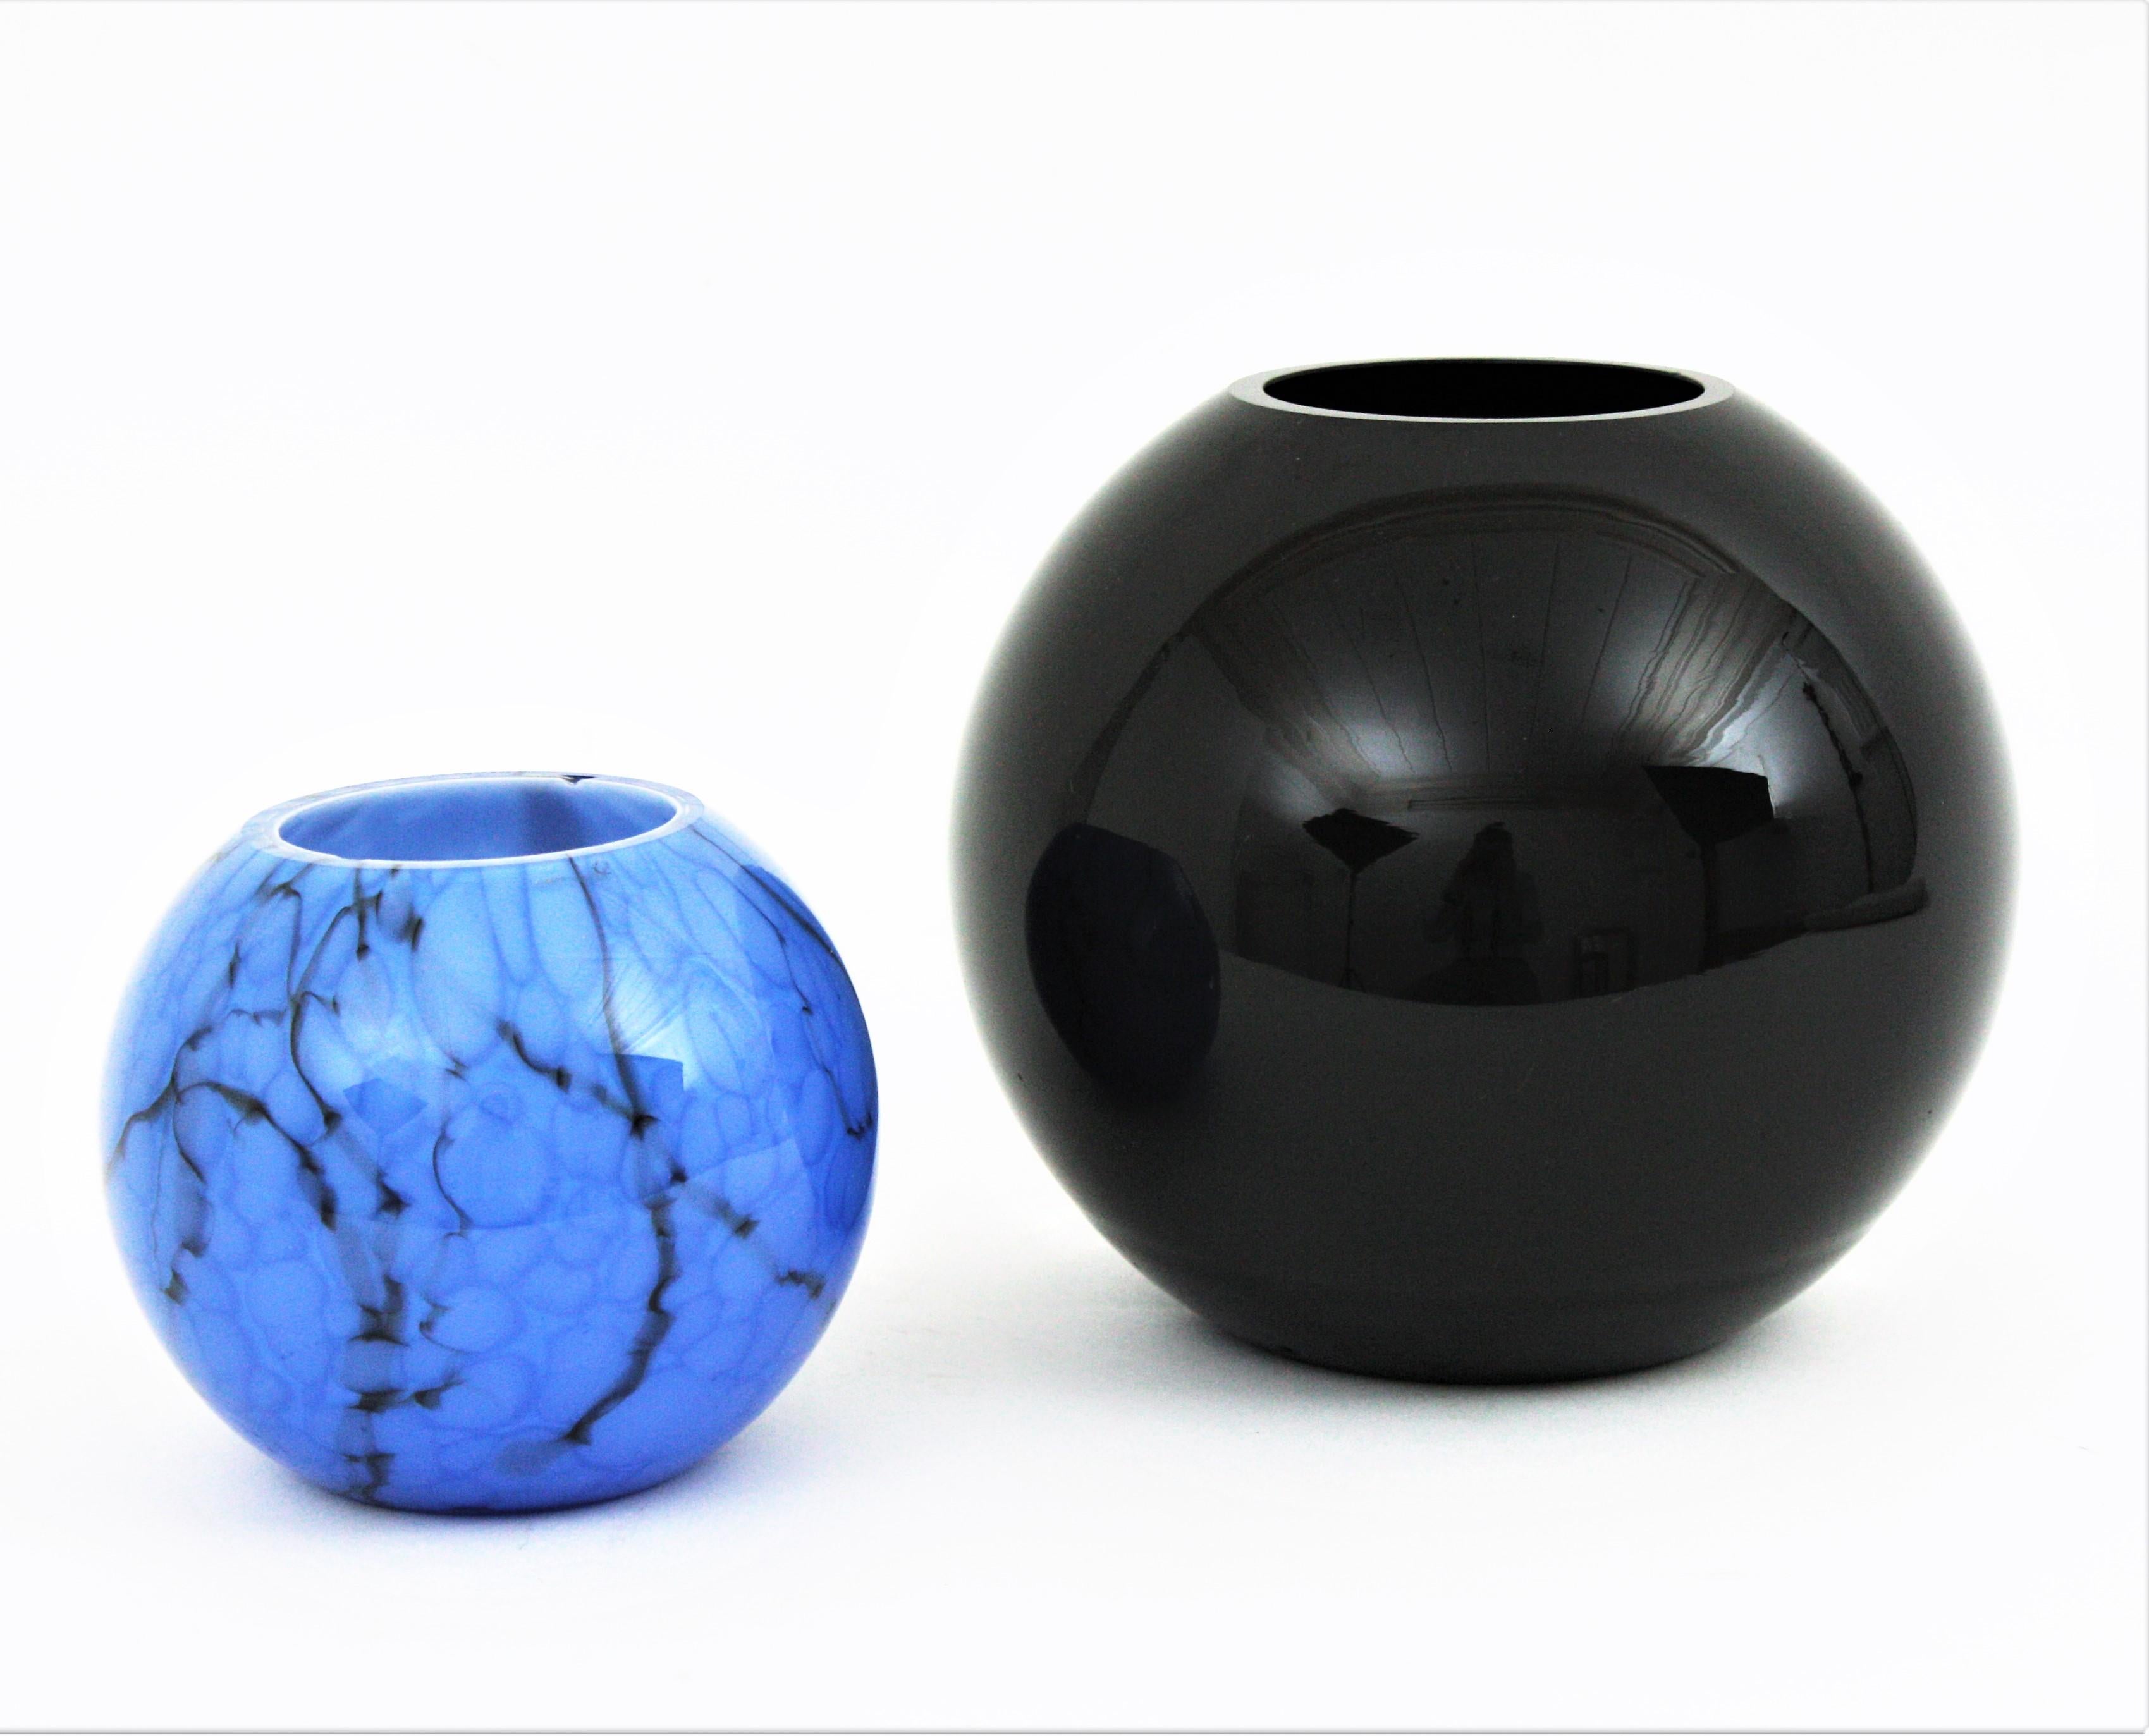 Set of two Round Shaped Murano Glass Vases, Italy, 1940s-1960s.
The small one is a ball shaped hand blown lattimo blue Murano glass vase attributed to Fratelli Toso for Venini, Italy 1940s.
This lovely sphere vase is made with lattimo or milk